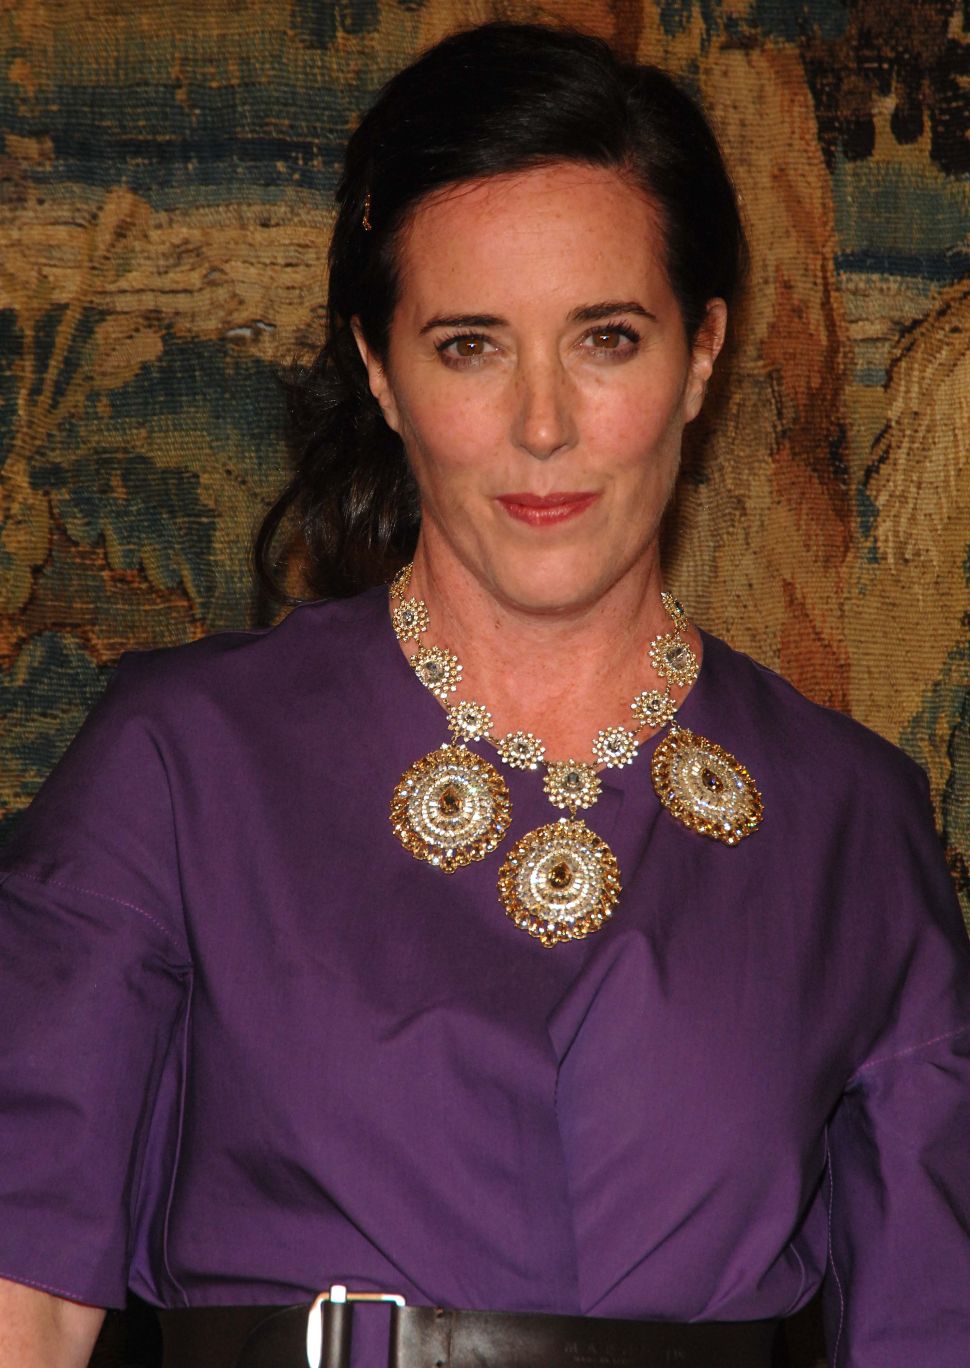 What happened to Kate Spades? How did Kate Spade end her life? - ABTC